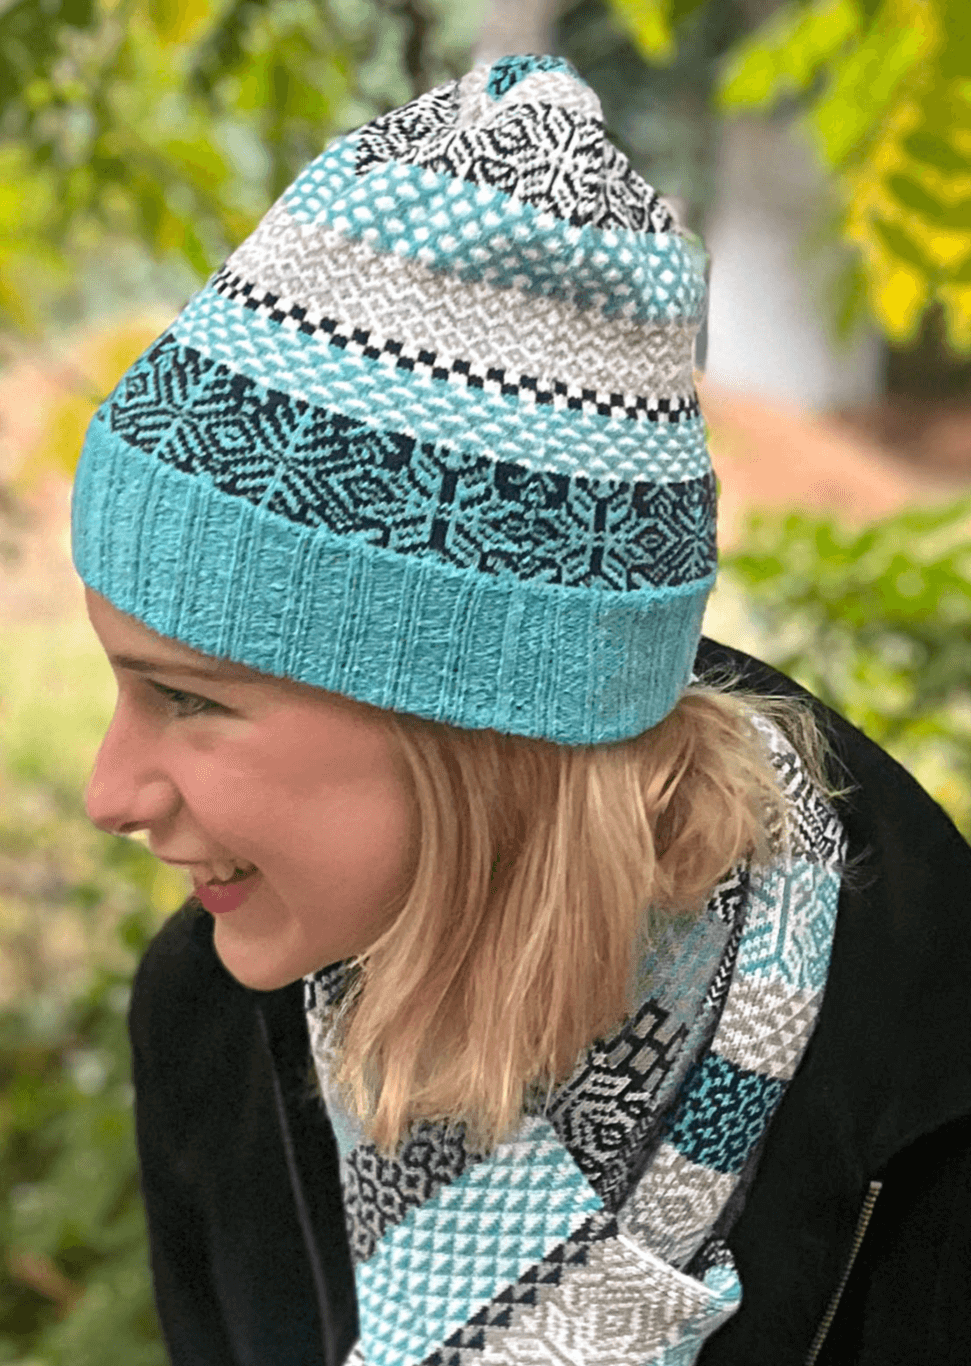 Solmate SNOWFALL Knitted Beanie Hat & Scarf with Colors Turquoise, Navy, Gray & White | Made in USA | Classy Cozy Cool Women's Made in America Clothing Boutique